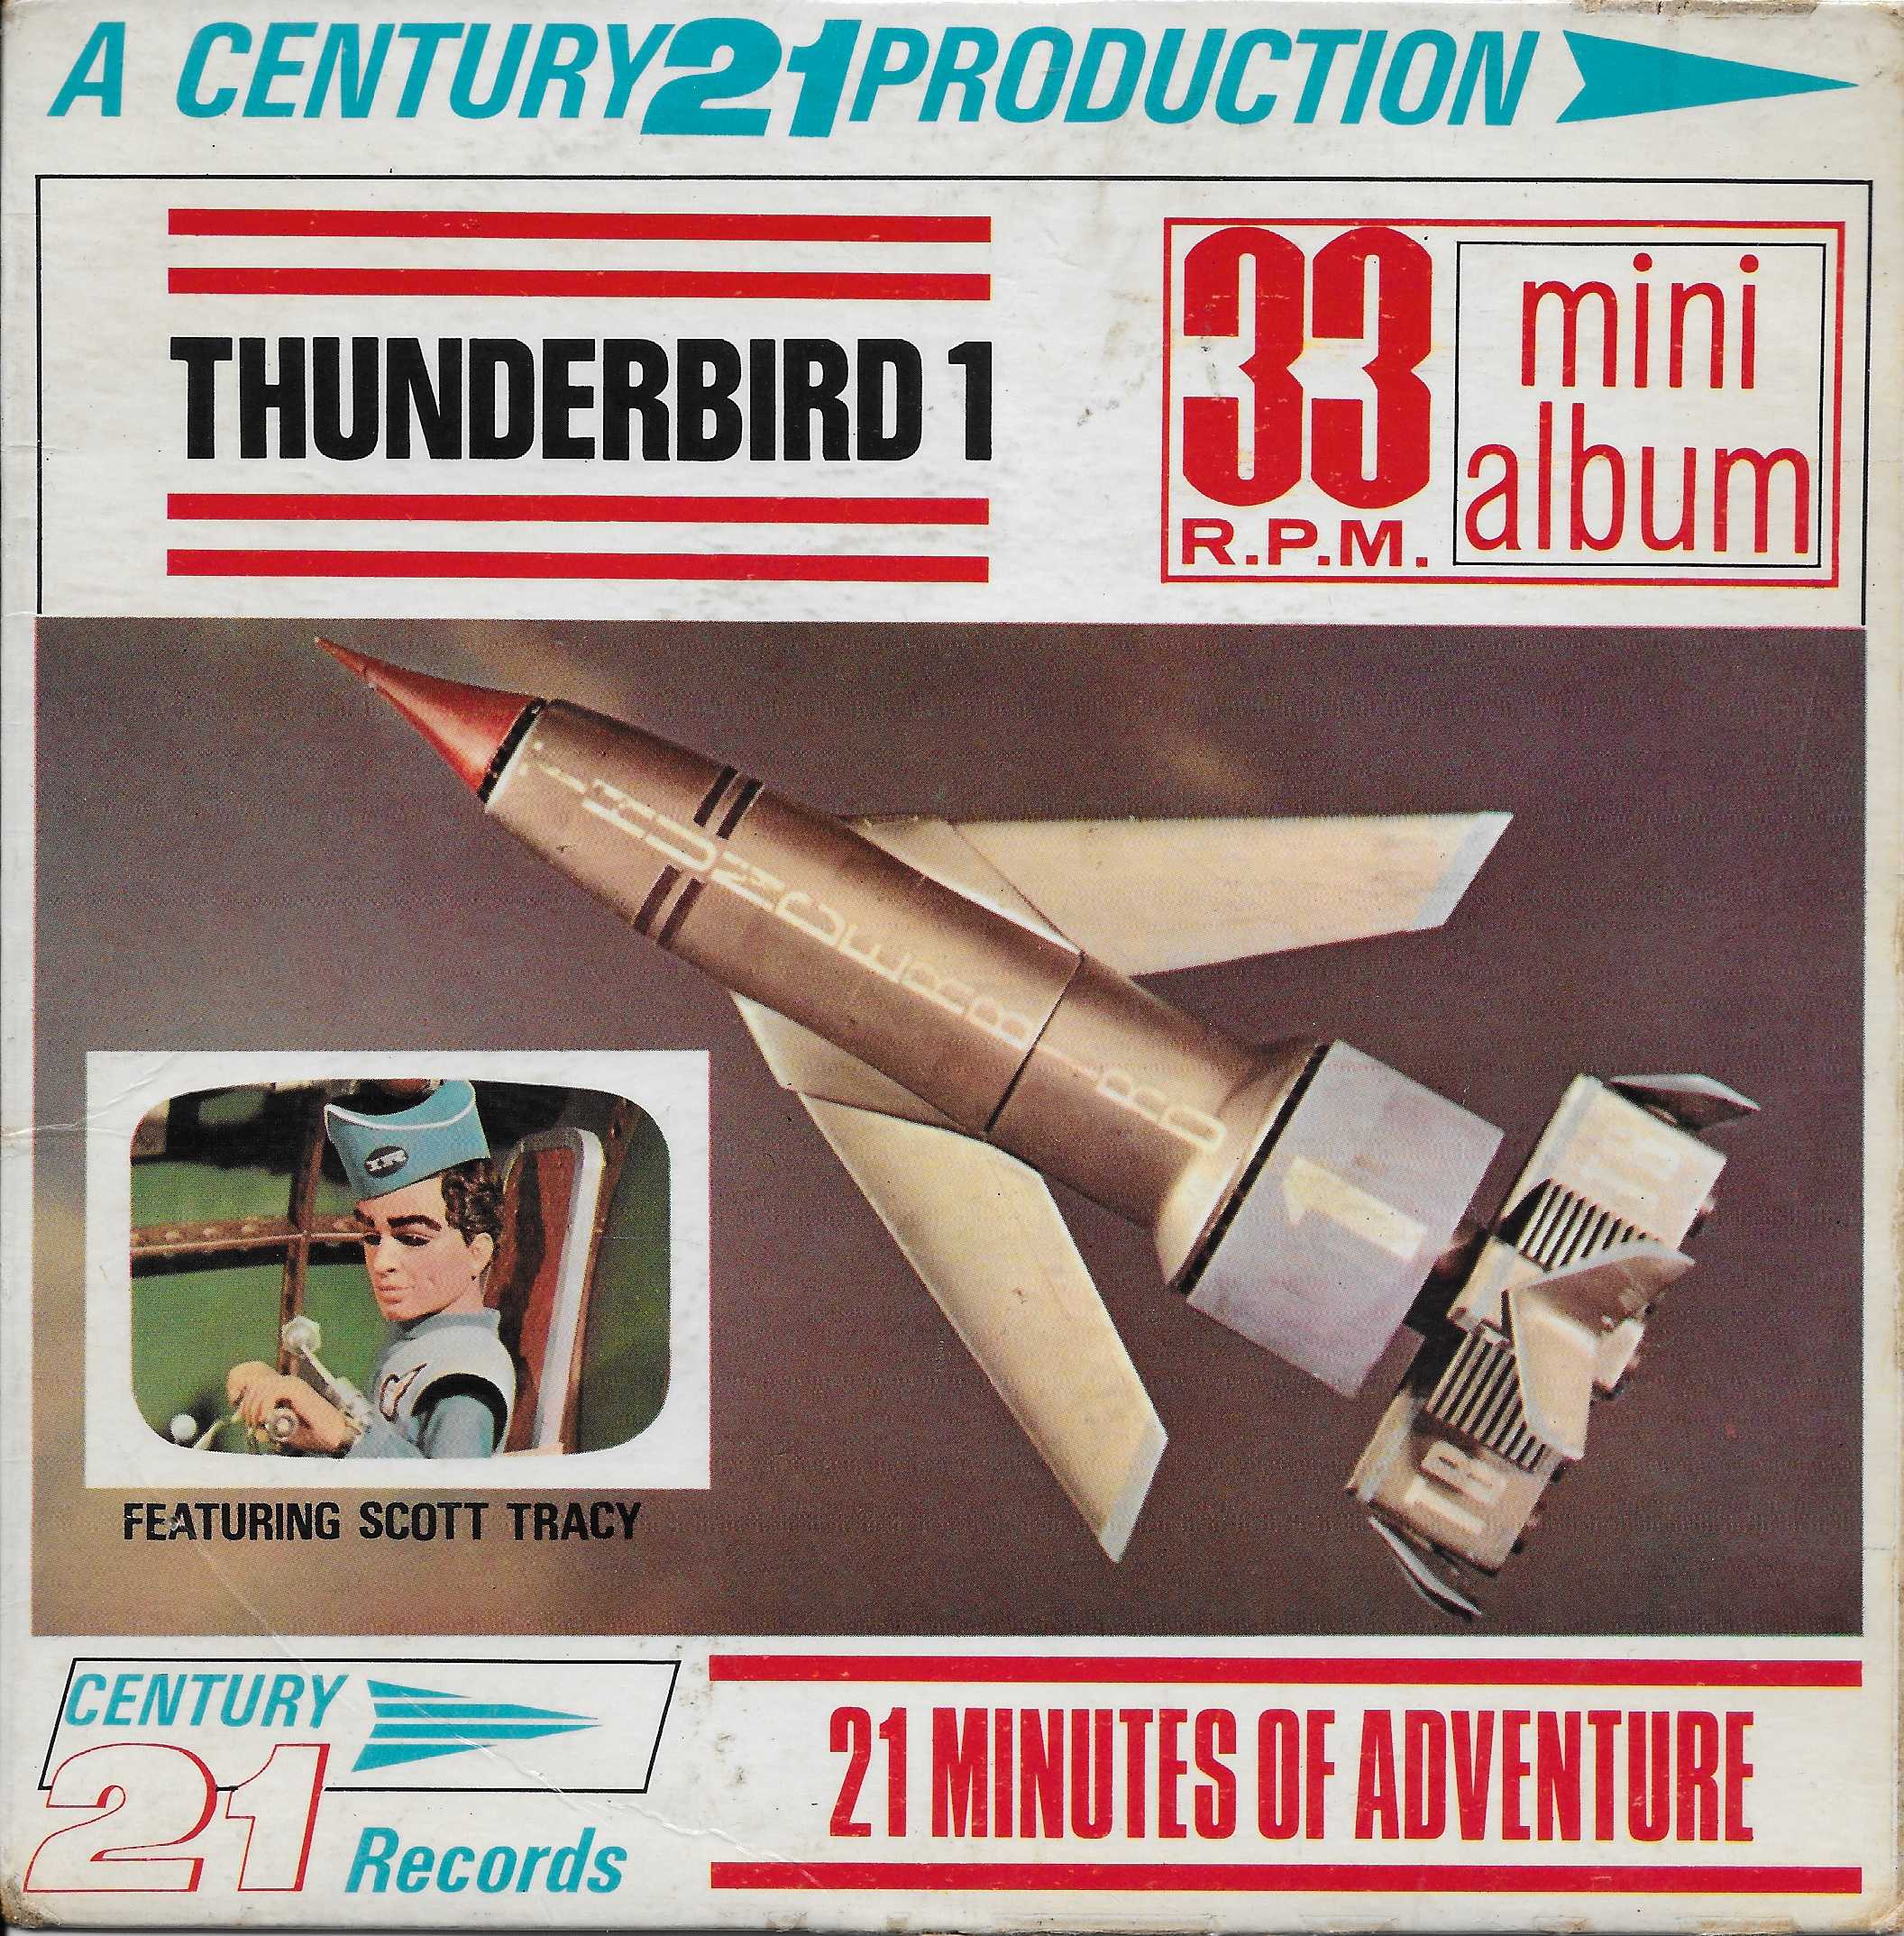 Picture of MA 108 Thunderbird 1 by artist Gerry Anderson / Sylvia Anderson / Barry Gray from ITV, Channel 4 and Channel 5 library